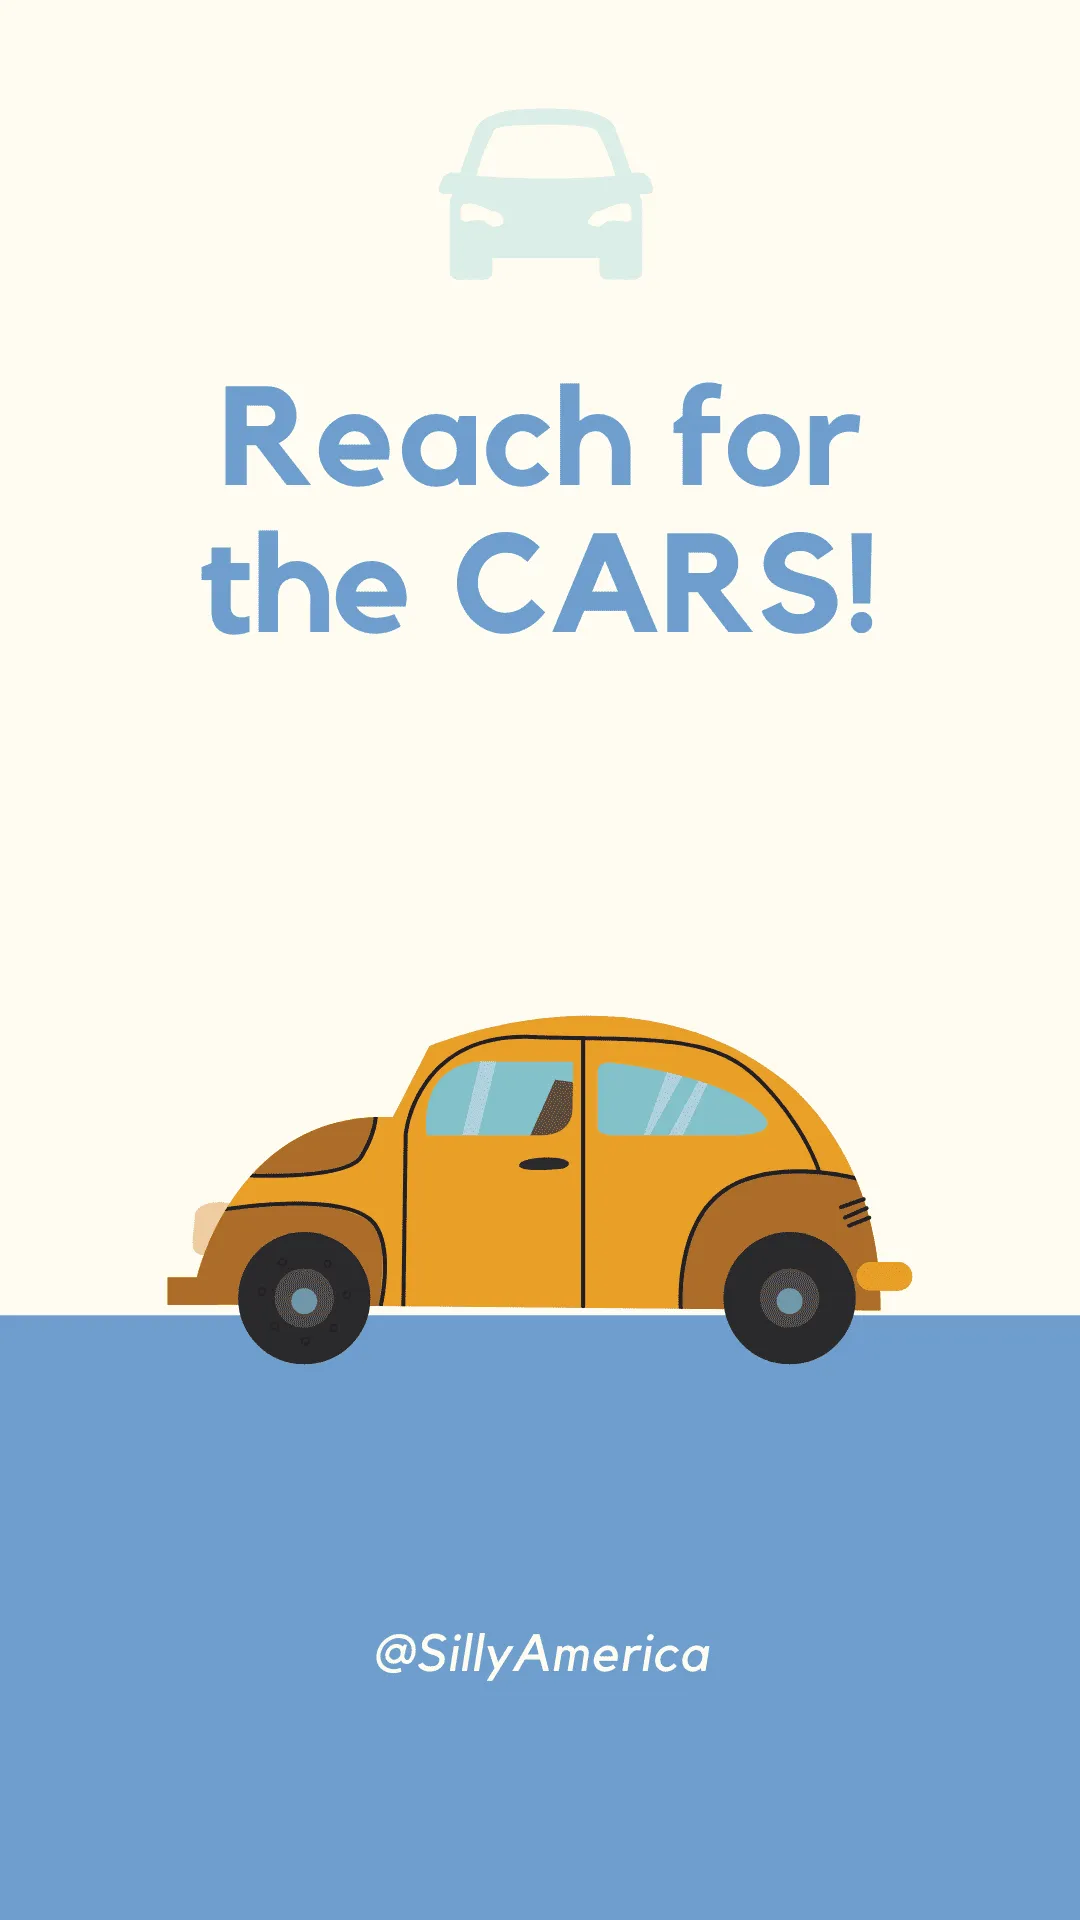 Reach for the CARS! - Car Puns to fuel your road trip content!